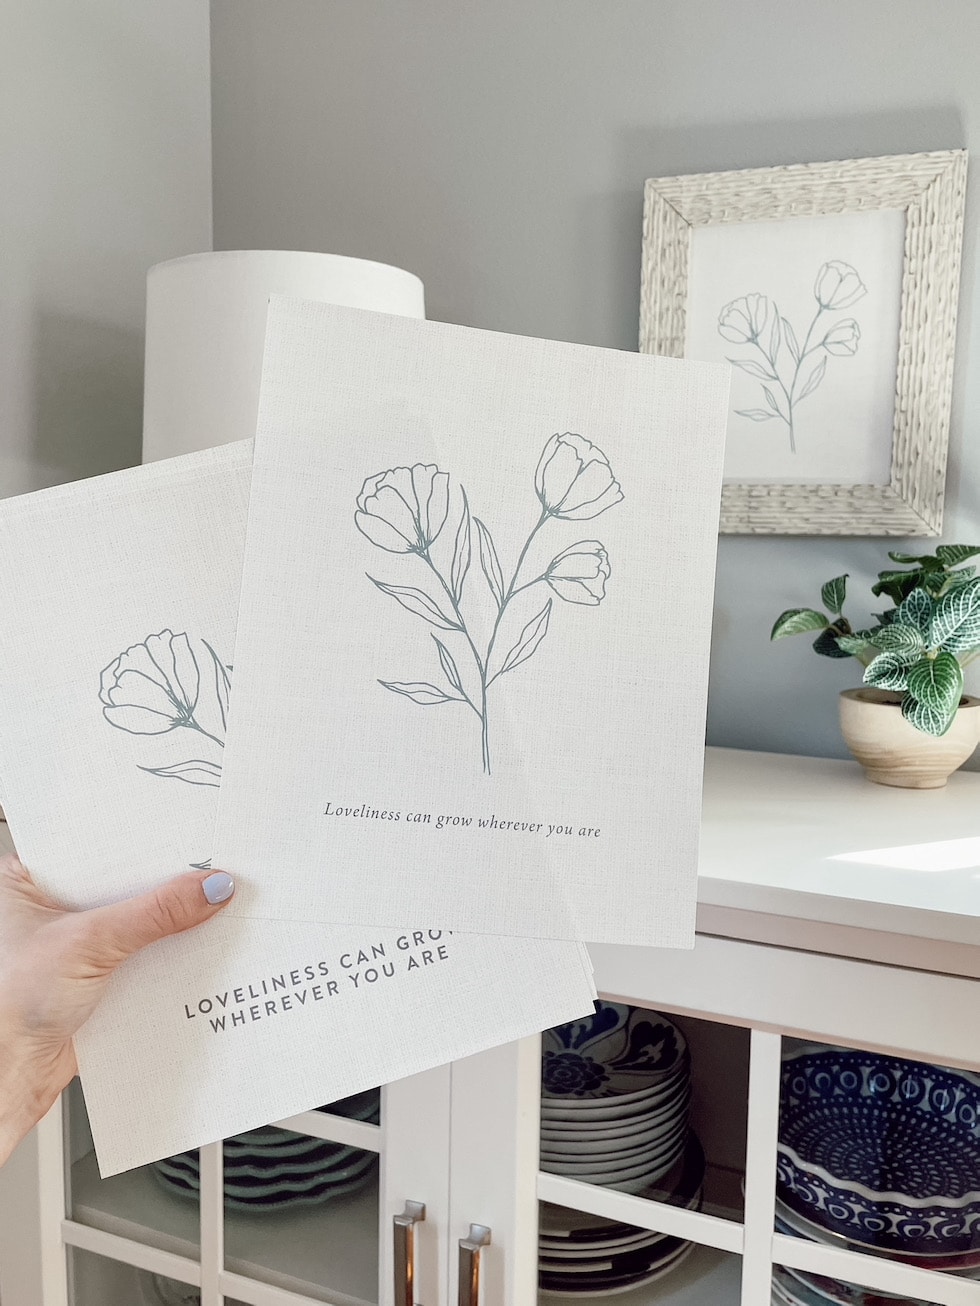 A Lovely Life Planner: Free Printable Guide to Savoring Every Season